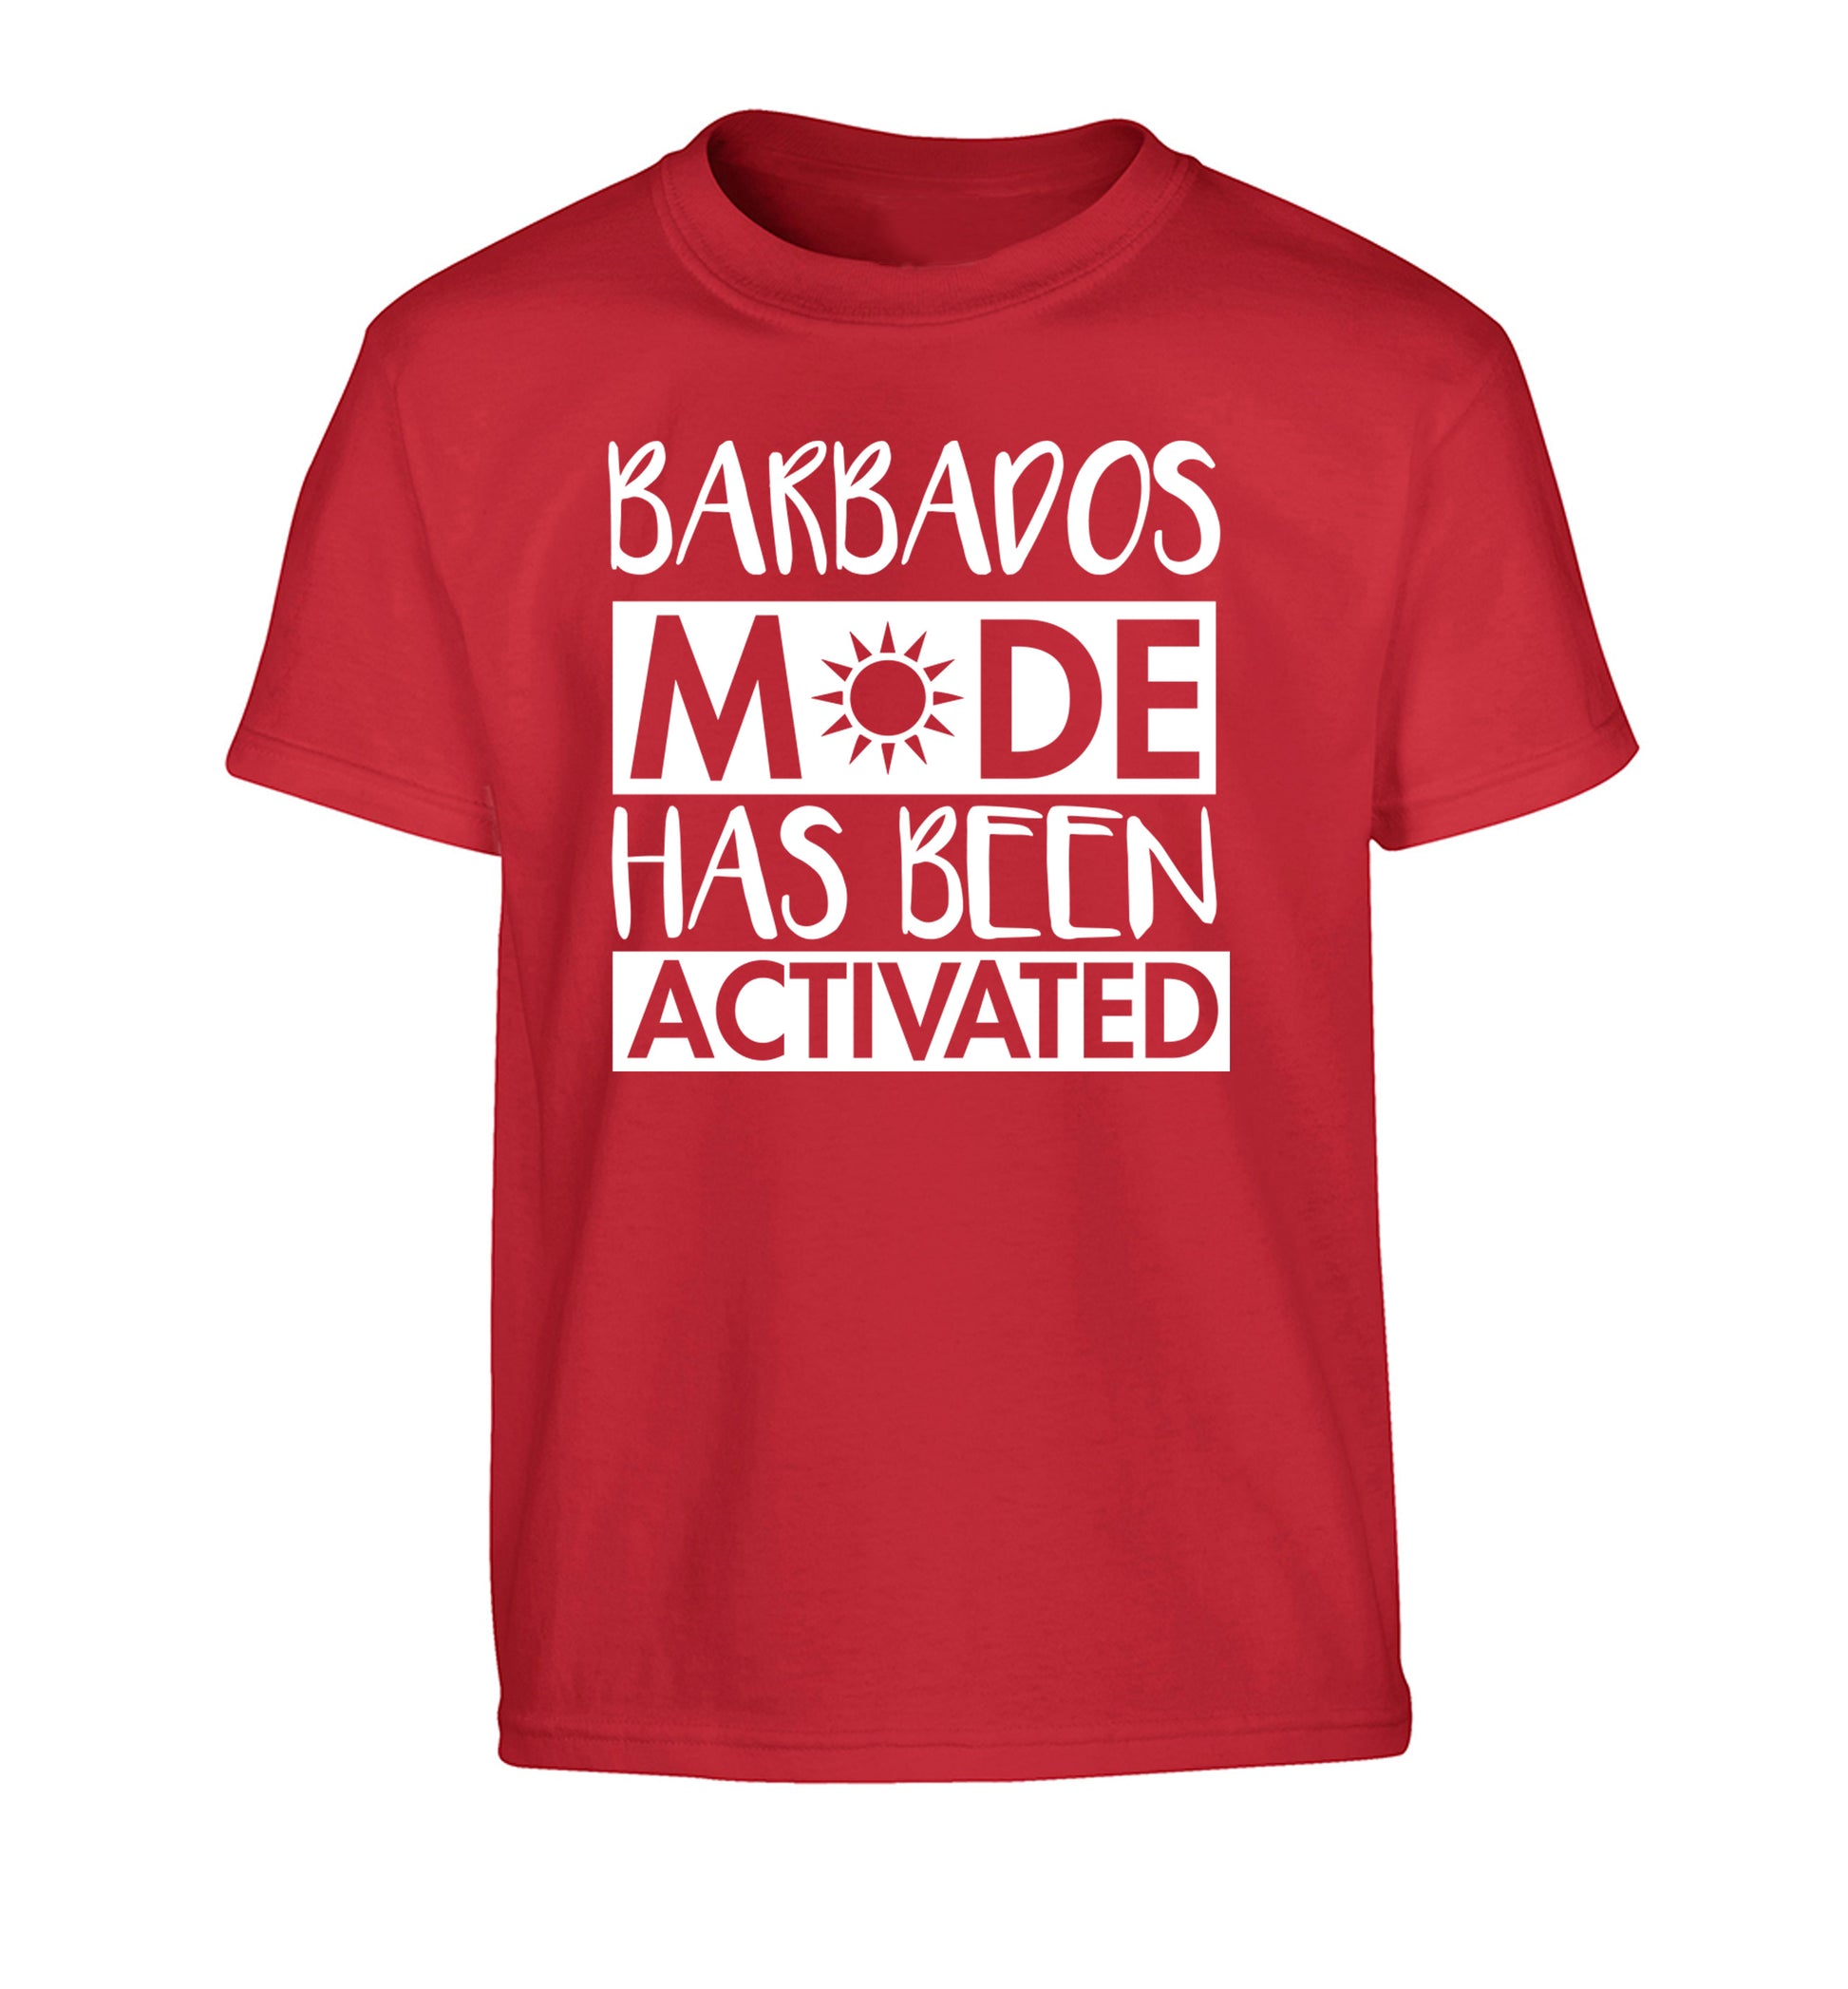 Barbados mode has been activated Children's red Tshirt 12-13 Years